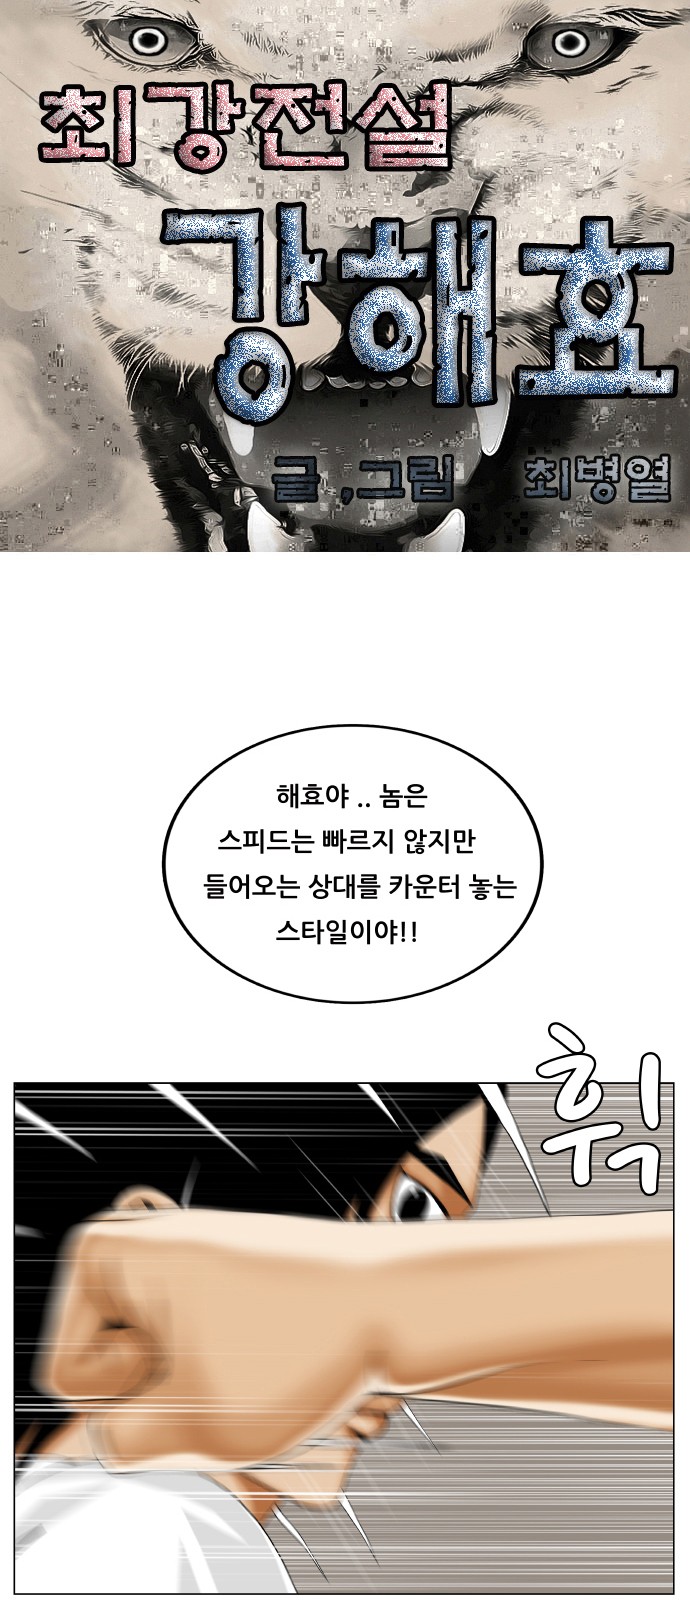 Ultimate Legend - Kang Hae Hyo - Chapter 356 - Page 1